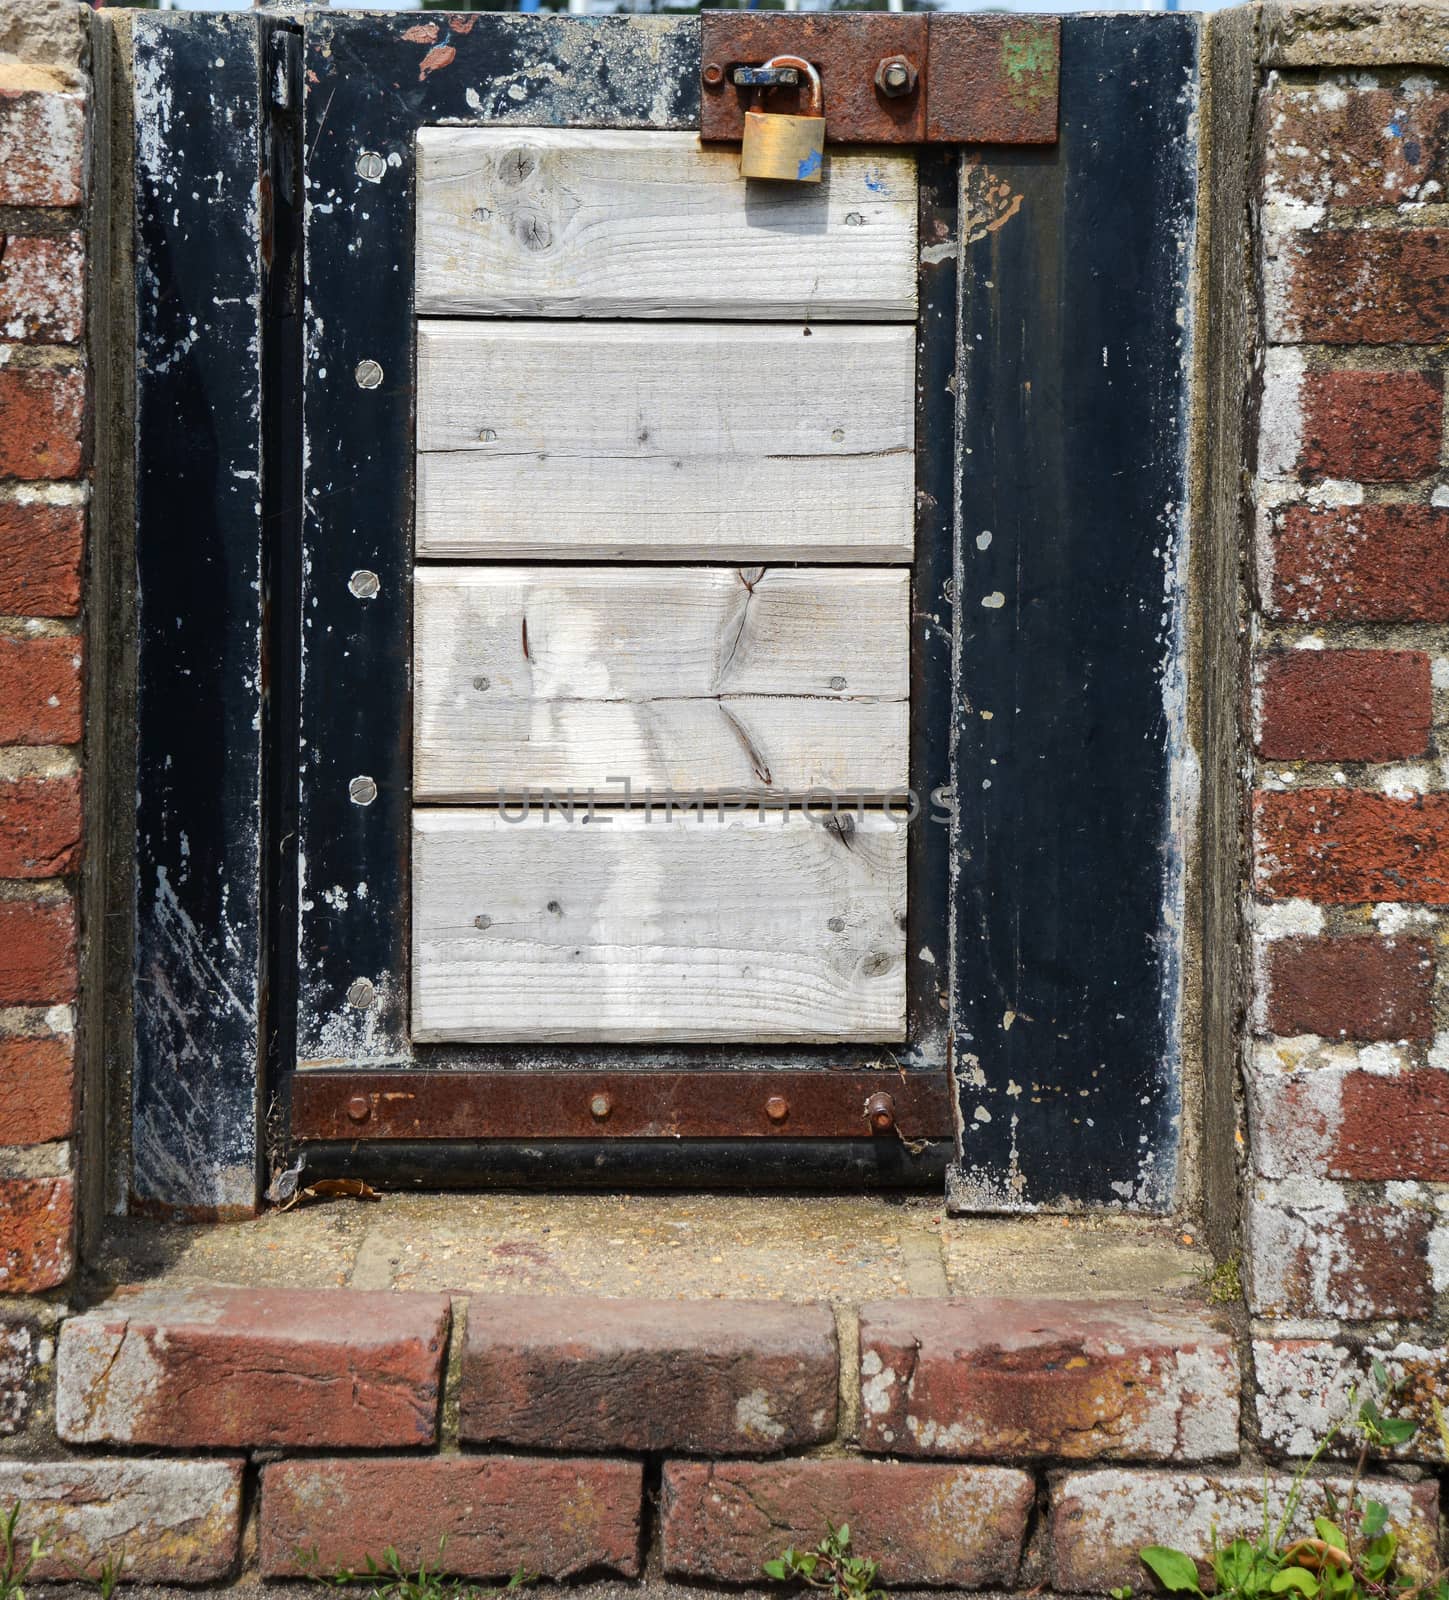 Small wood and metal gate in a brick wall, padlocked shut